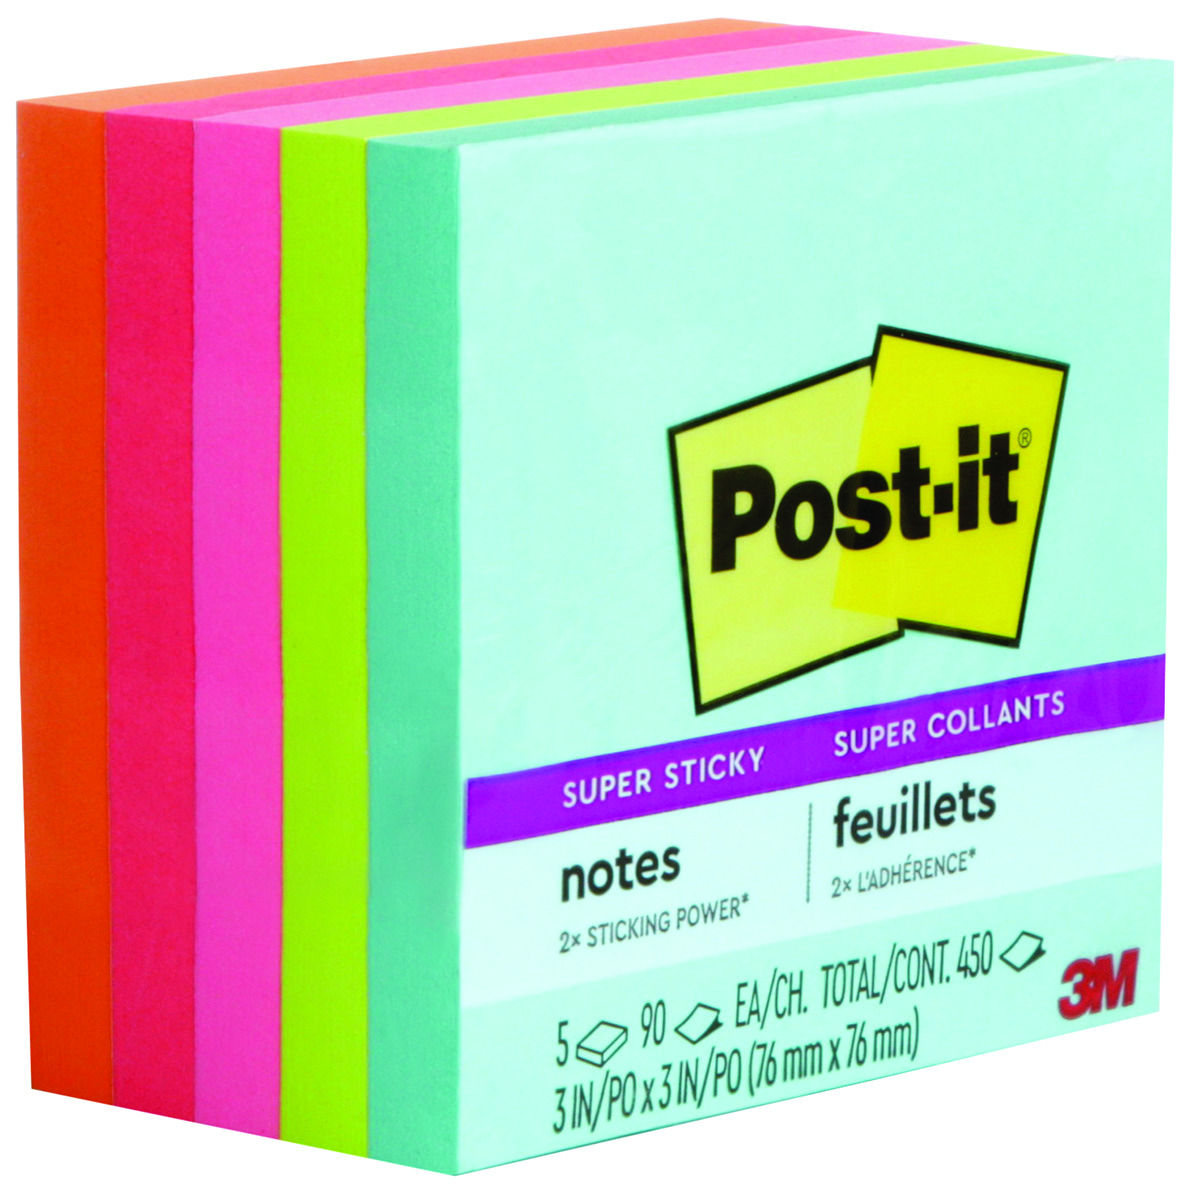 Post-it Notes and Sticky Notes